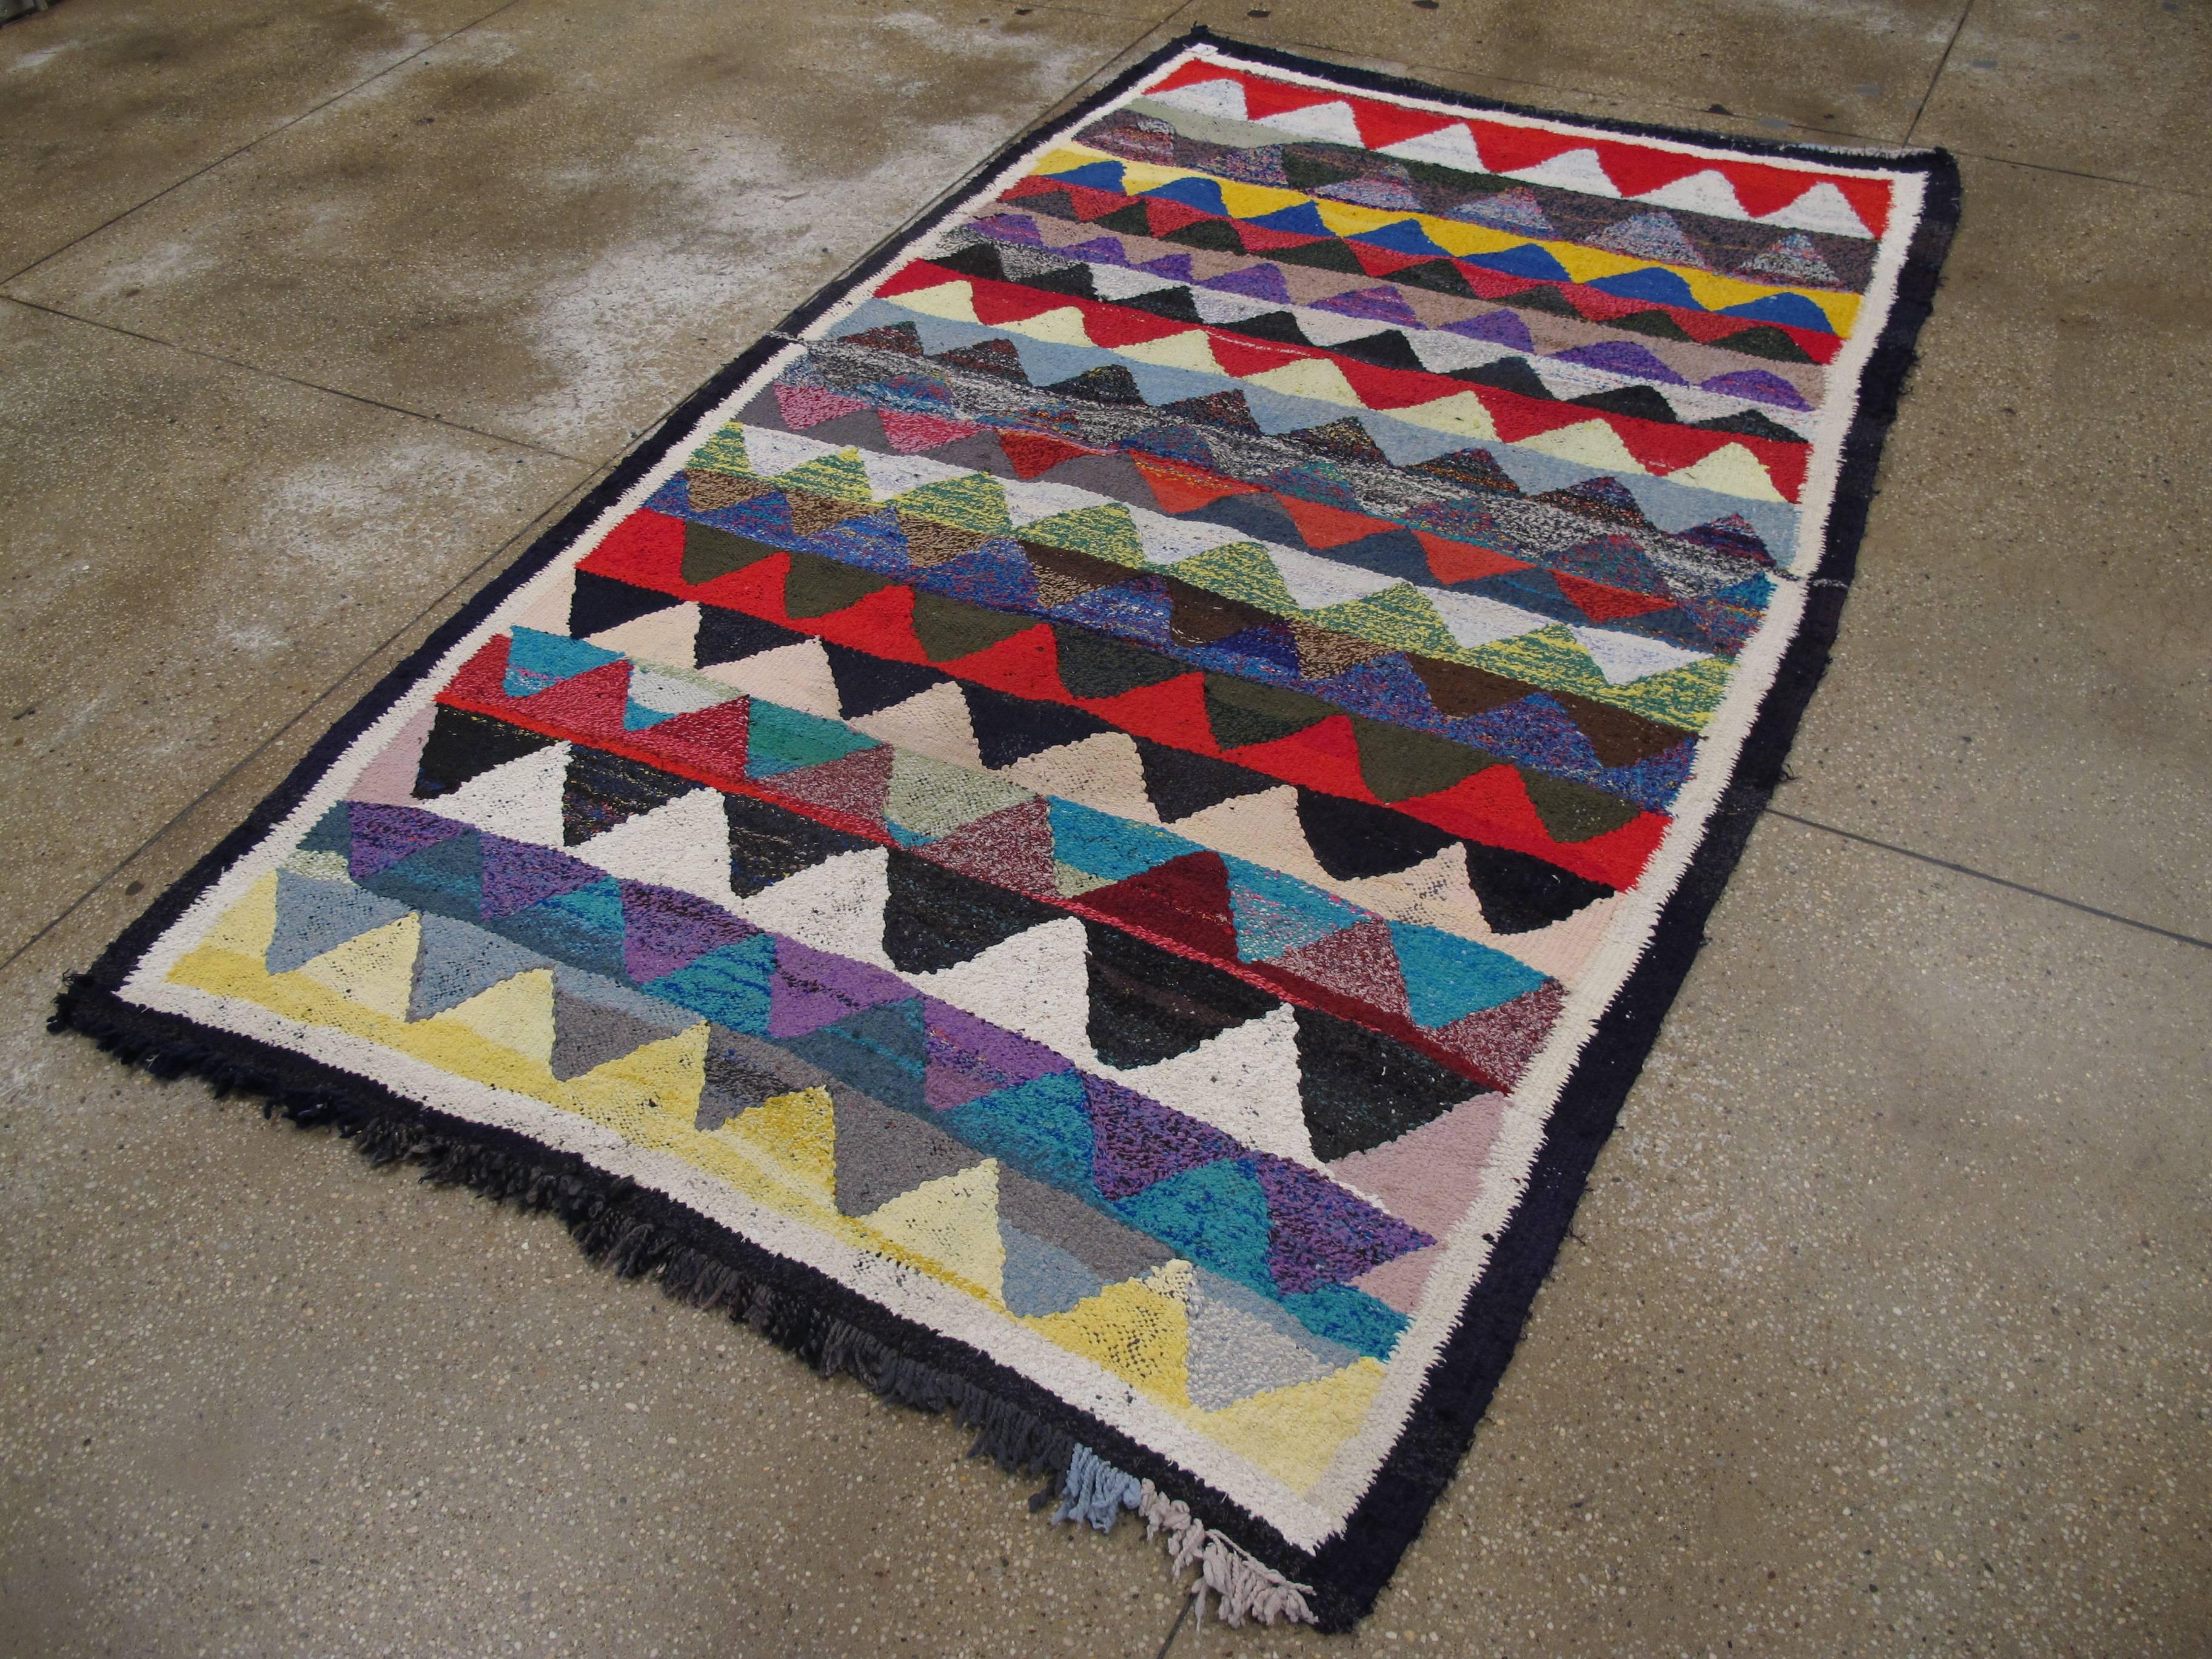 A colorful vintage Persian flat-woven Kilim carpet from the mid-20th century (reversible).